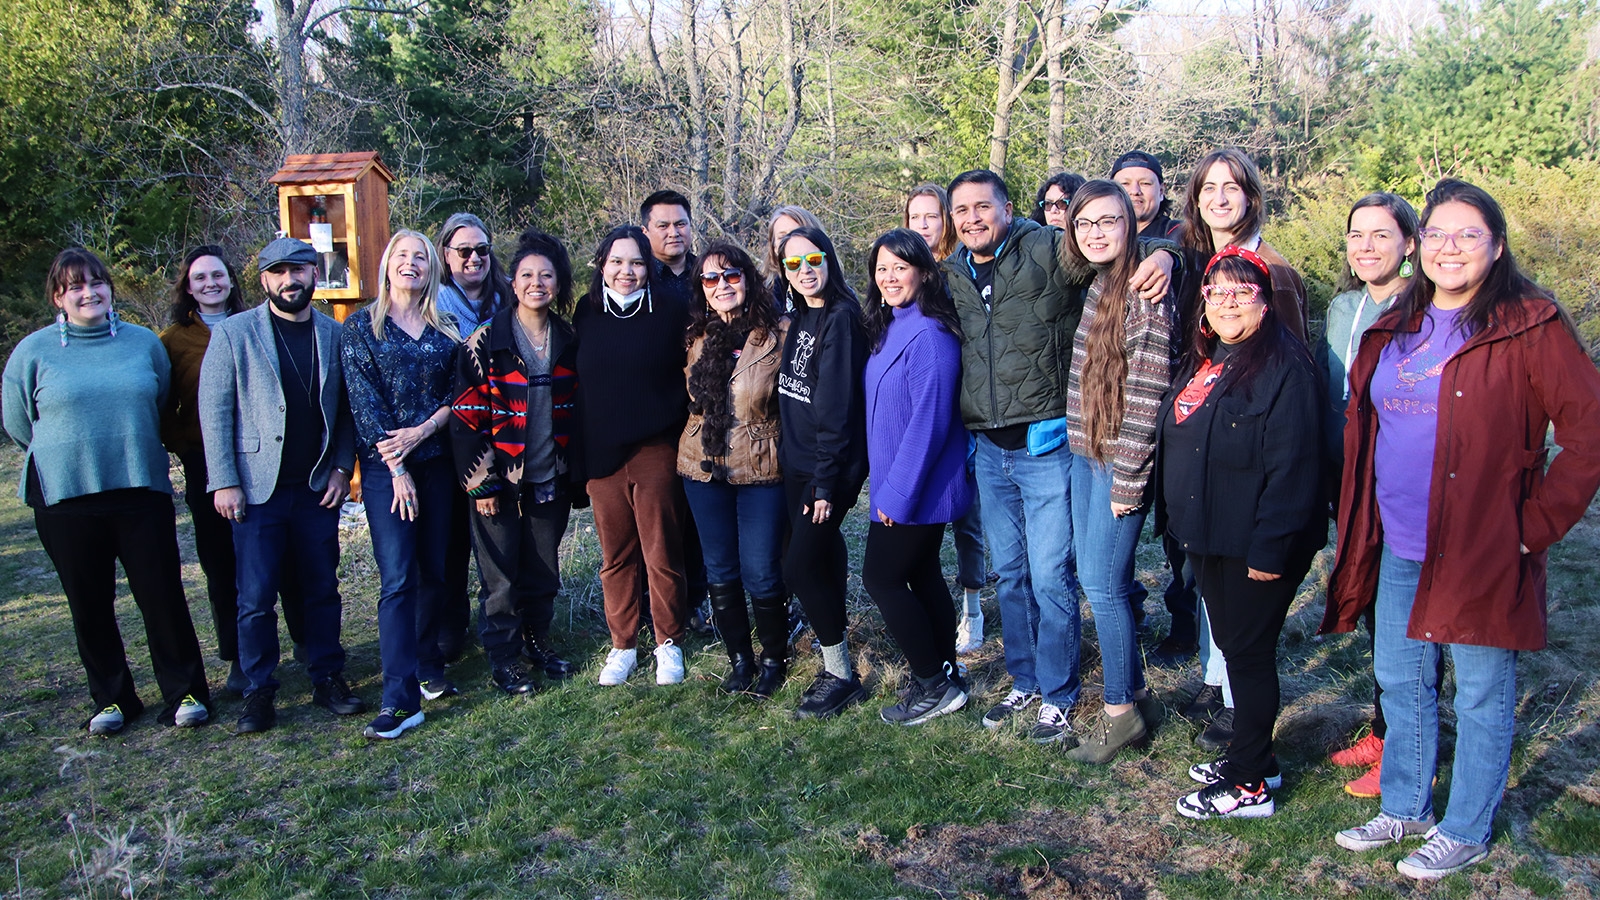 A photo of 21 members of Indigenous Nations Poets standing outside.